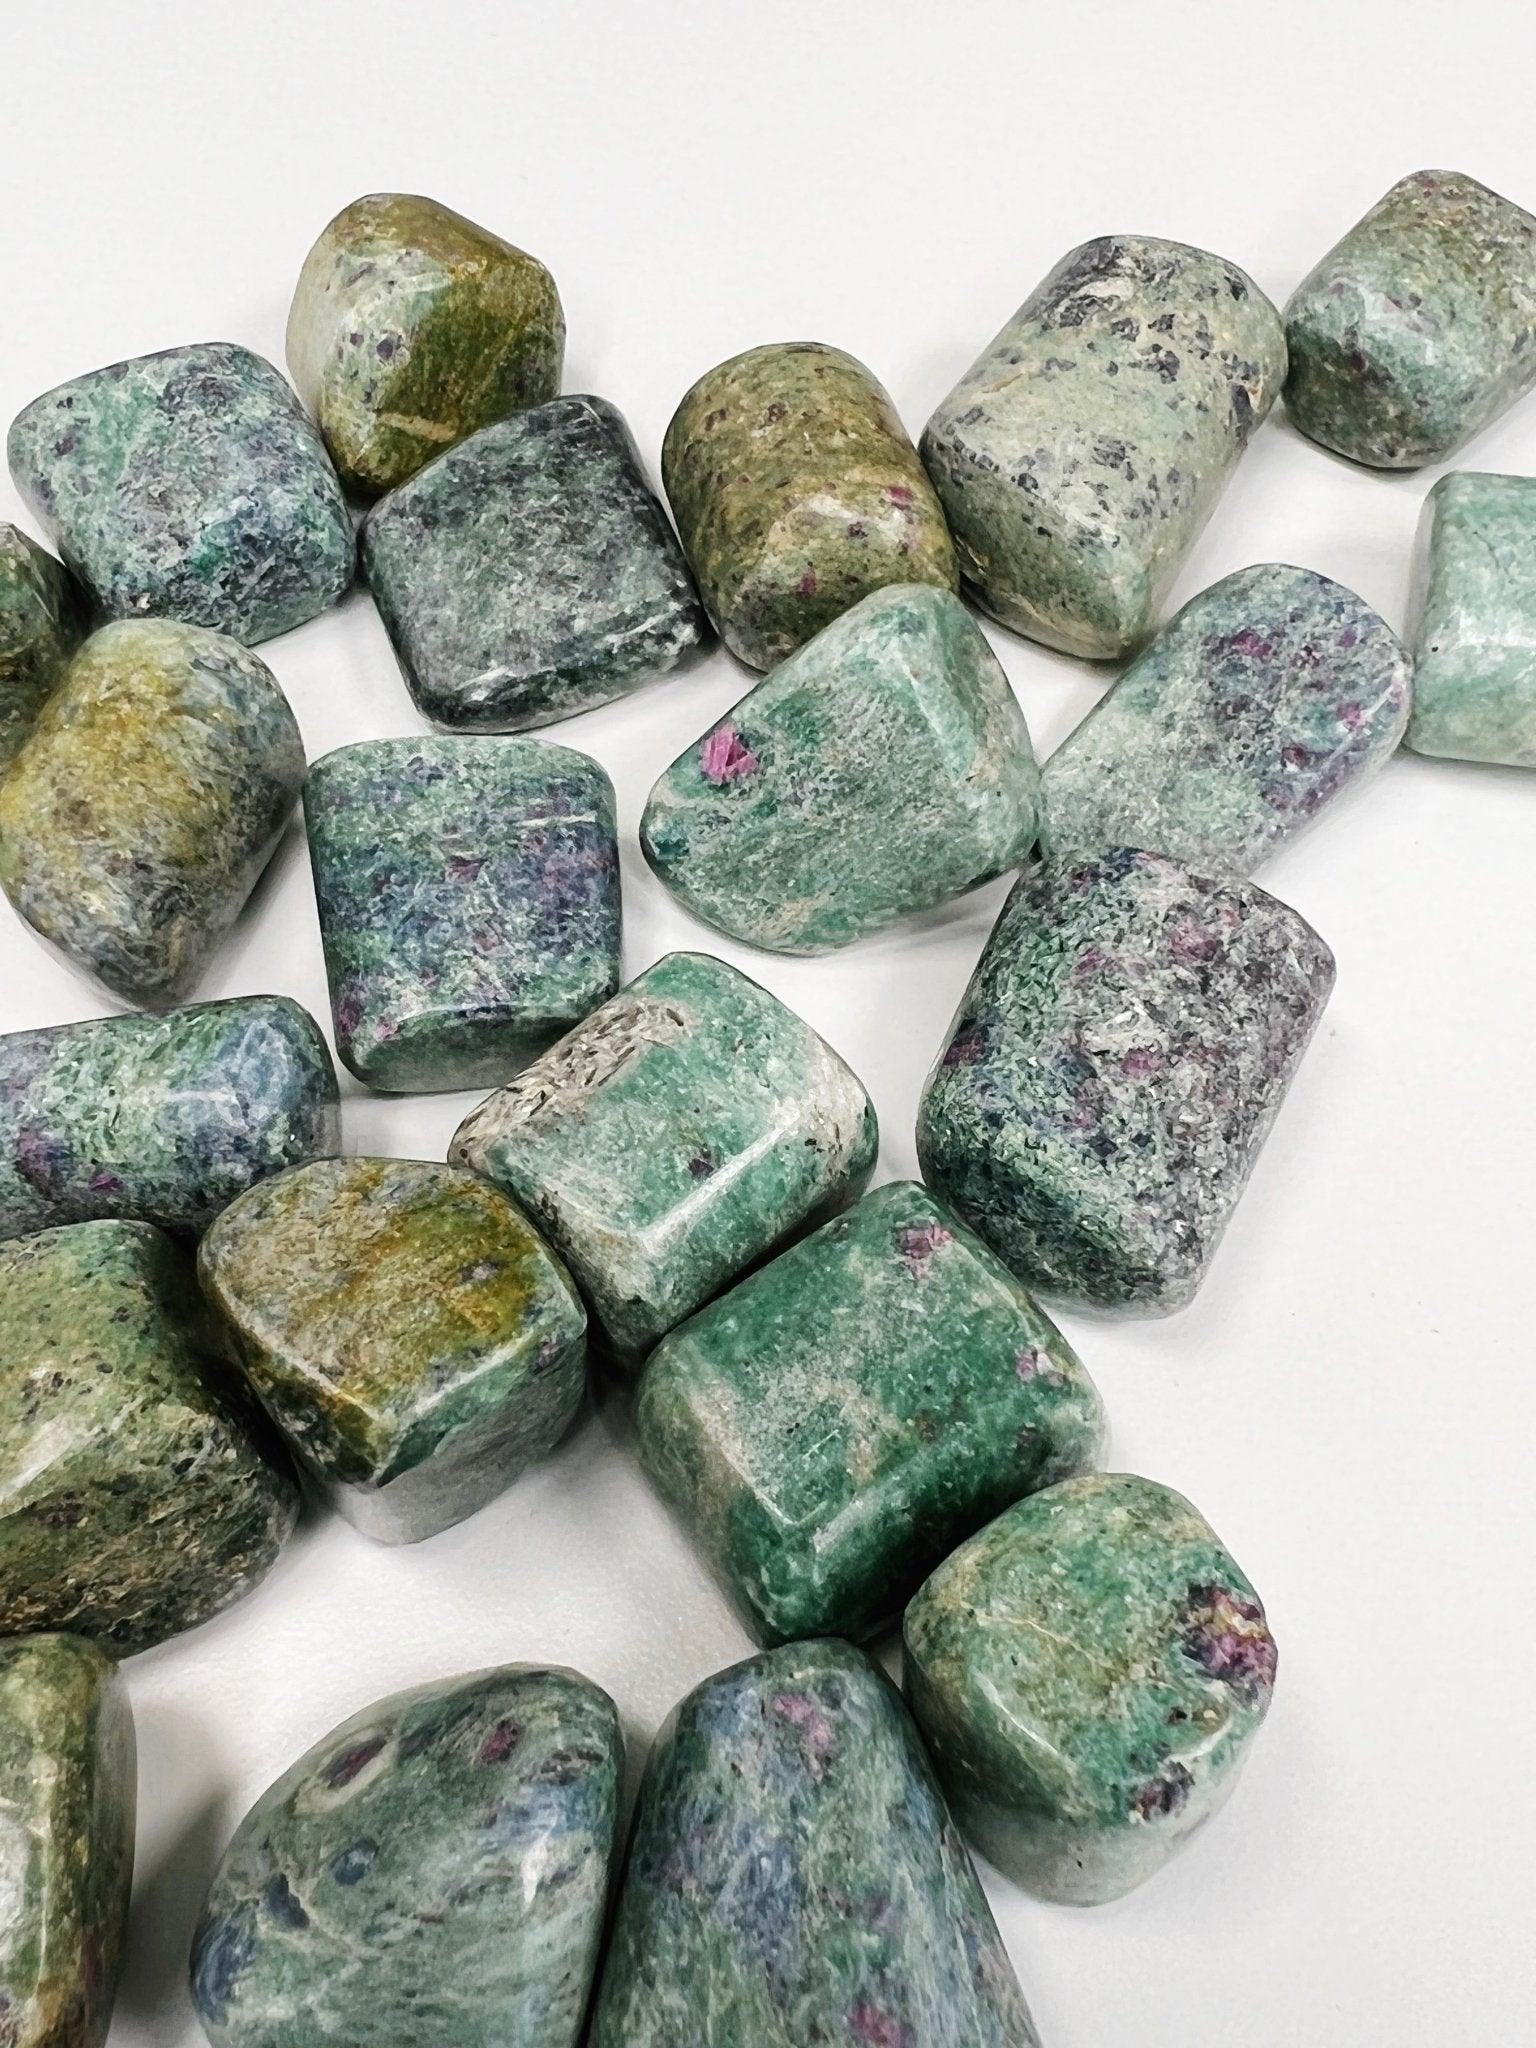 RUBY IN FUCHSITE TUMBLE - 33 bday, end of year sale, fuchsite, holiday sale, joy gift bundle, love gift bundle, new year sale, pocket crystal, pocket crystals, pocket stone, ruby, ruby in fuchsite, tumble, tumbled stone, tumbles - The Mineral Maven